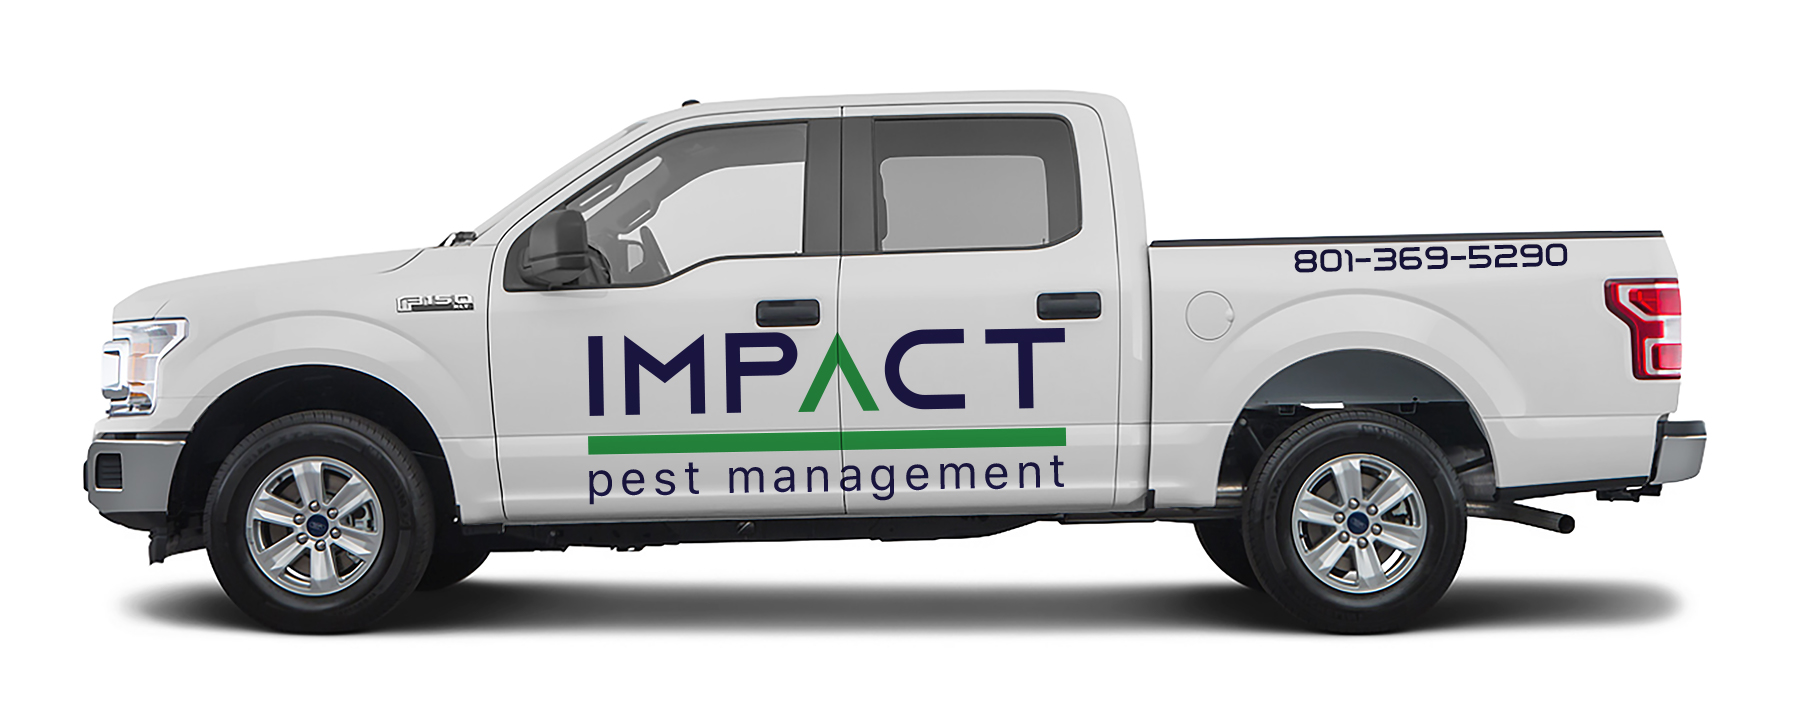 Impact Pest Management Ford F-150 Driver